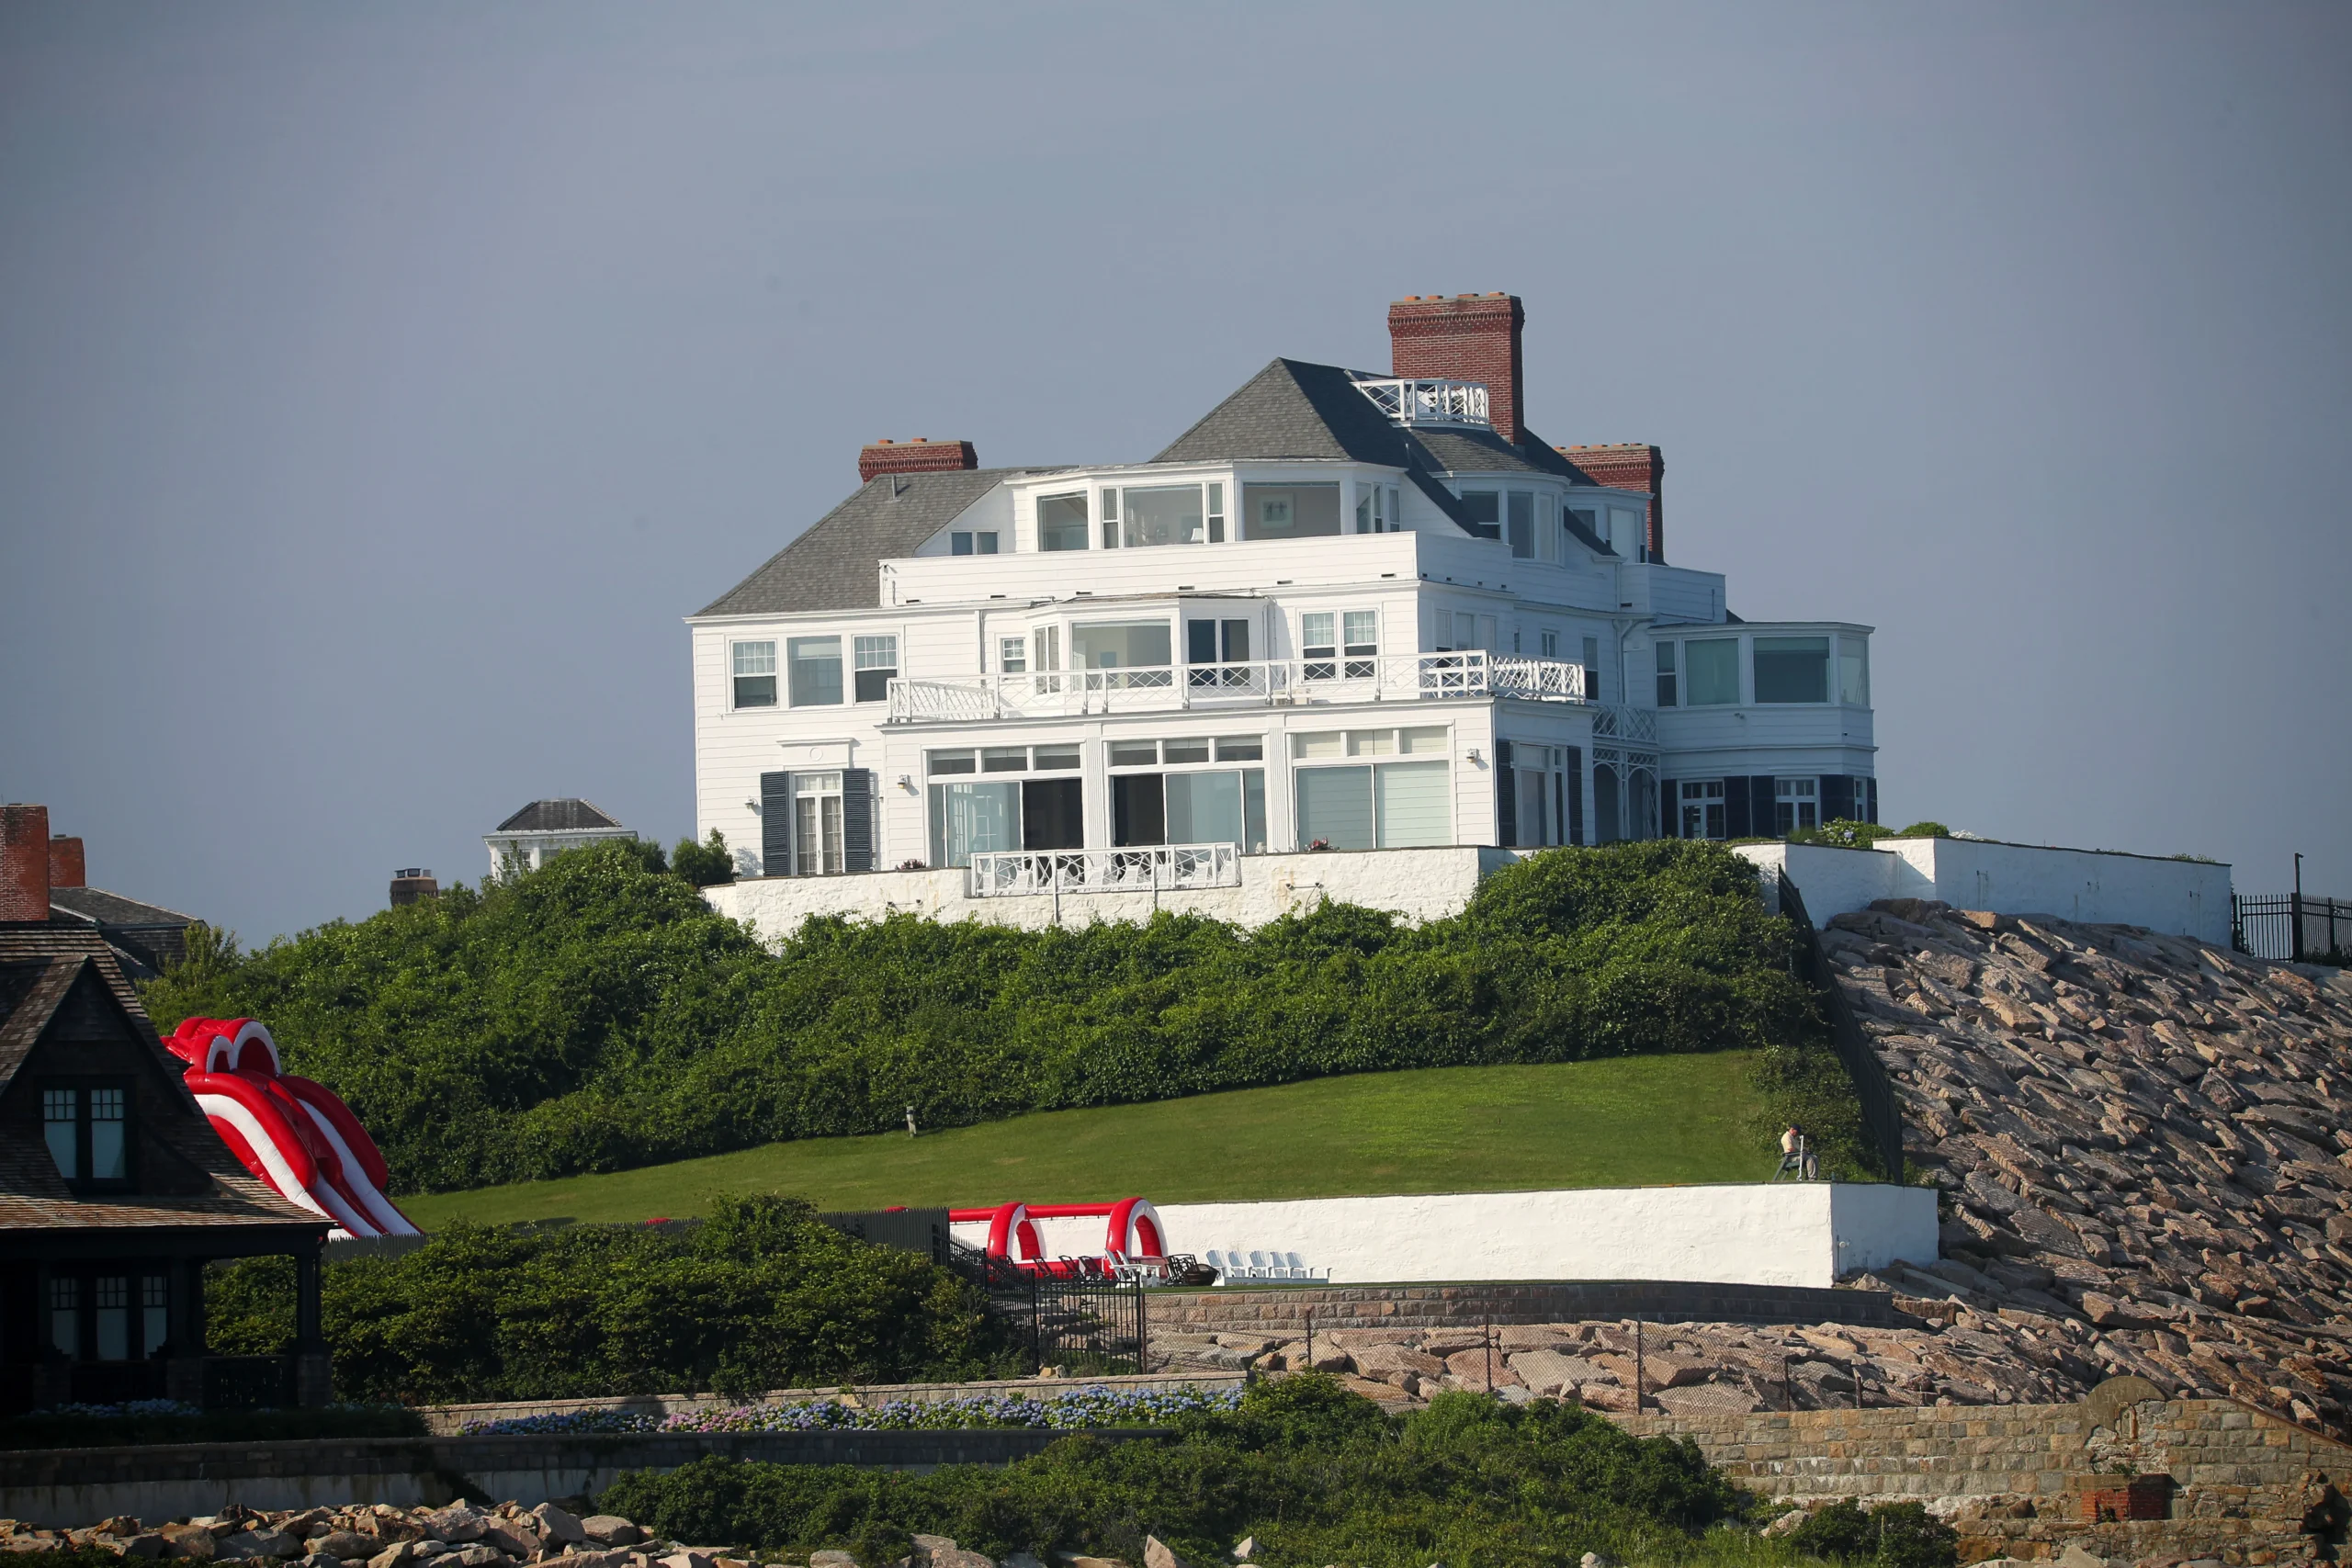 "Take a Glimpse Inside Taylor Swift's $17M Rhode Island Holiday House, a Hub for Gatsby-Style Parties"